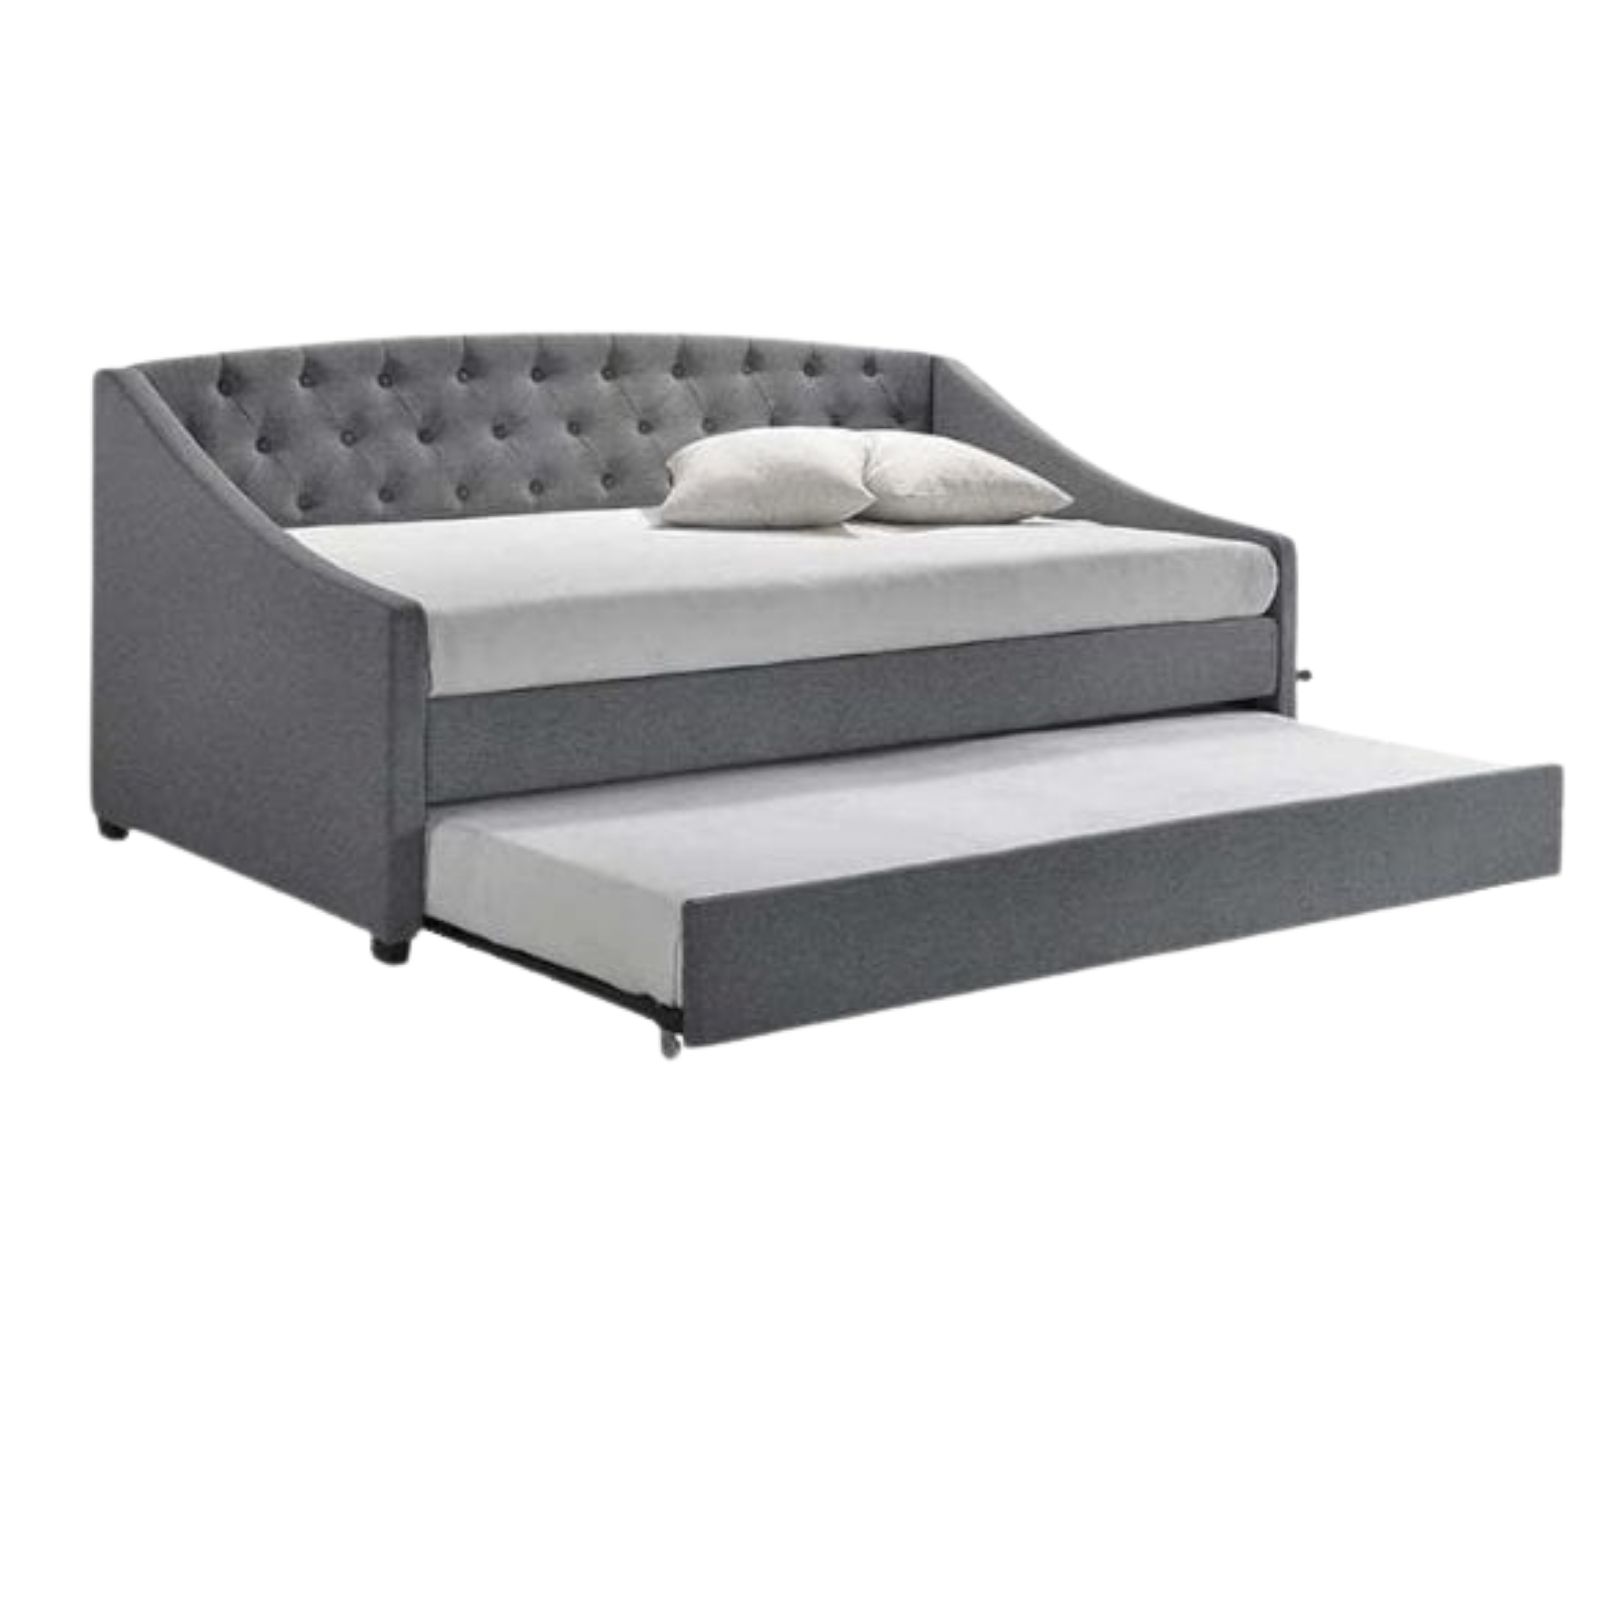 Olsen Daybed with Trundle | Buy Sofa Beds - 743143